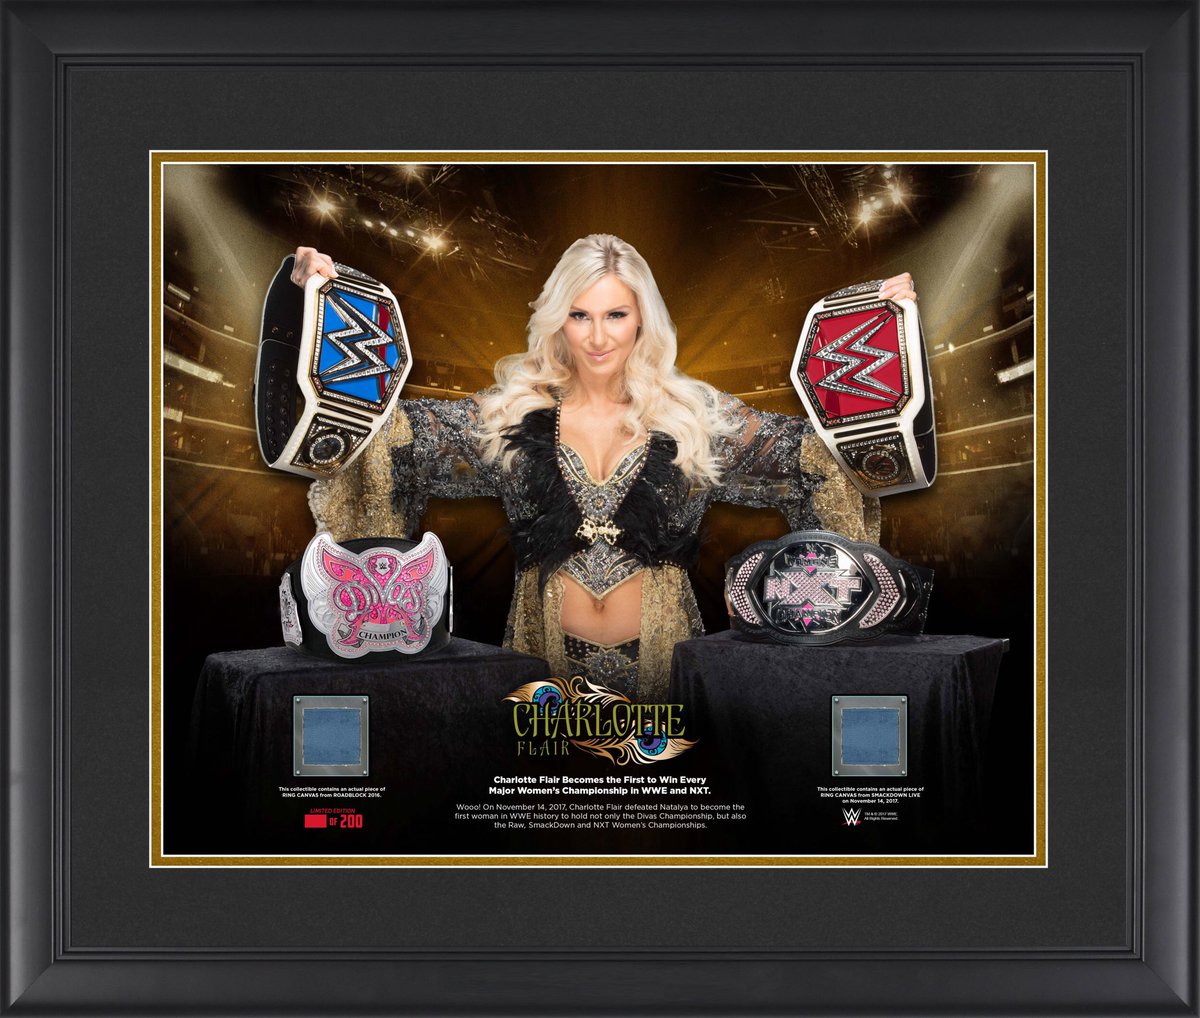 Charlotte Flair on Twitter: "Continue the 💎 NOW! https://t.co/DcQN3Ul8Eh https://t.co/5b5SmoG0S8"